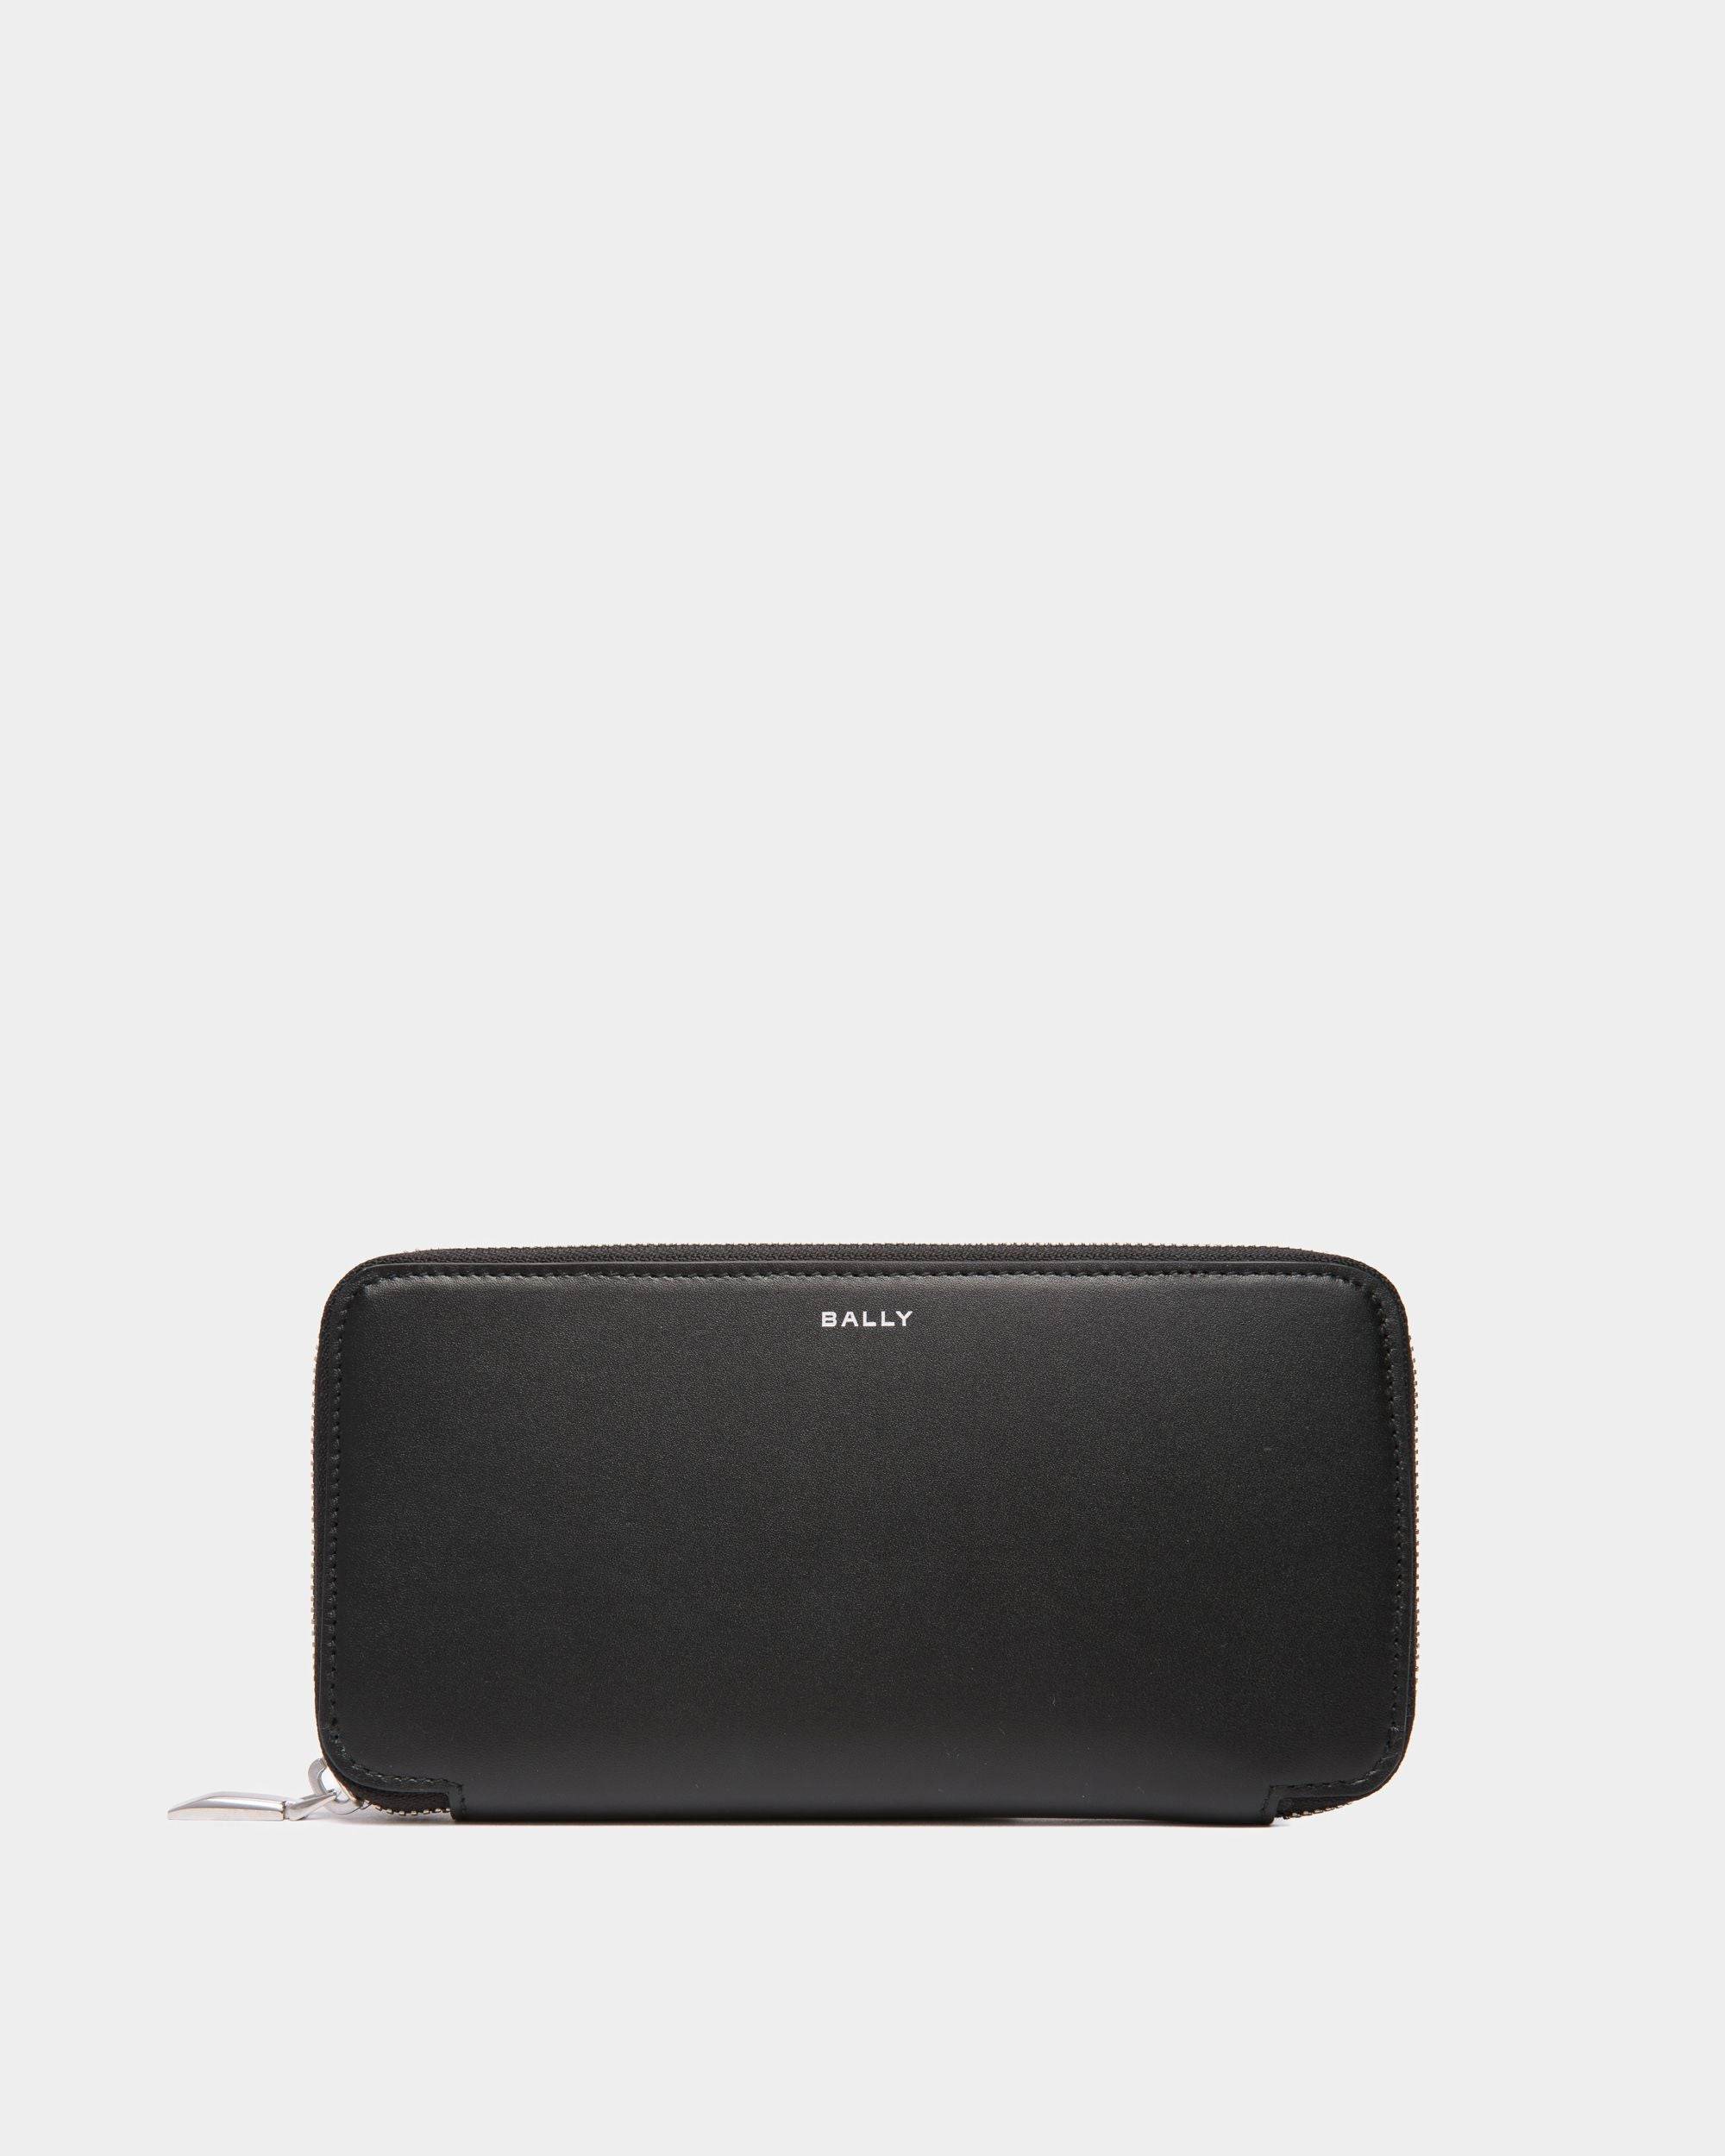 Busy Bally | Men's Zip Around Wallet in Black Leather | Bally | Still Life Front